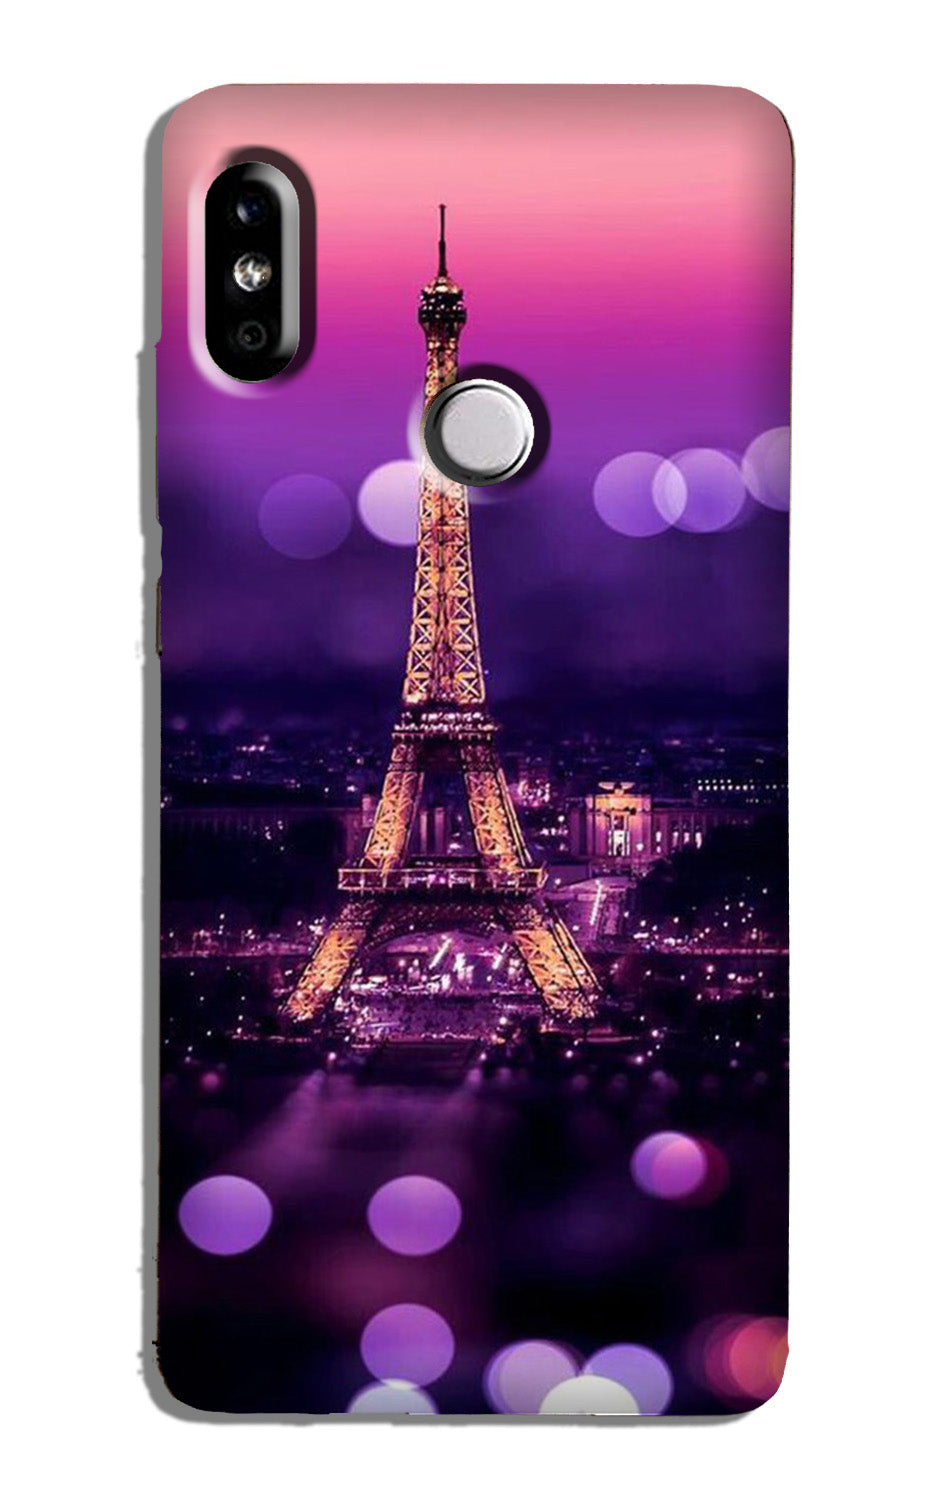 Eiffel Tower Case for Redmi Note 6 Pro